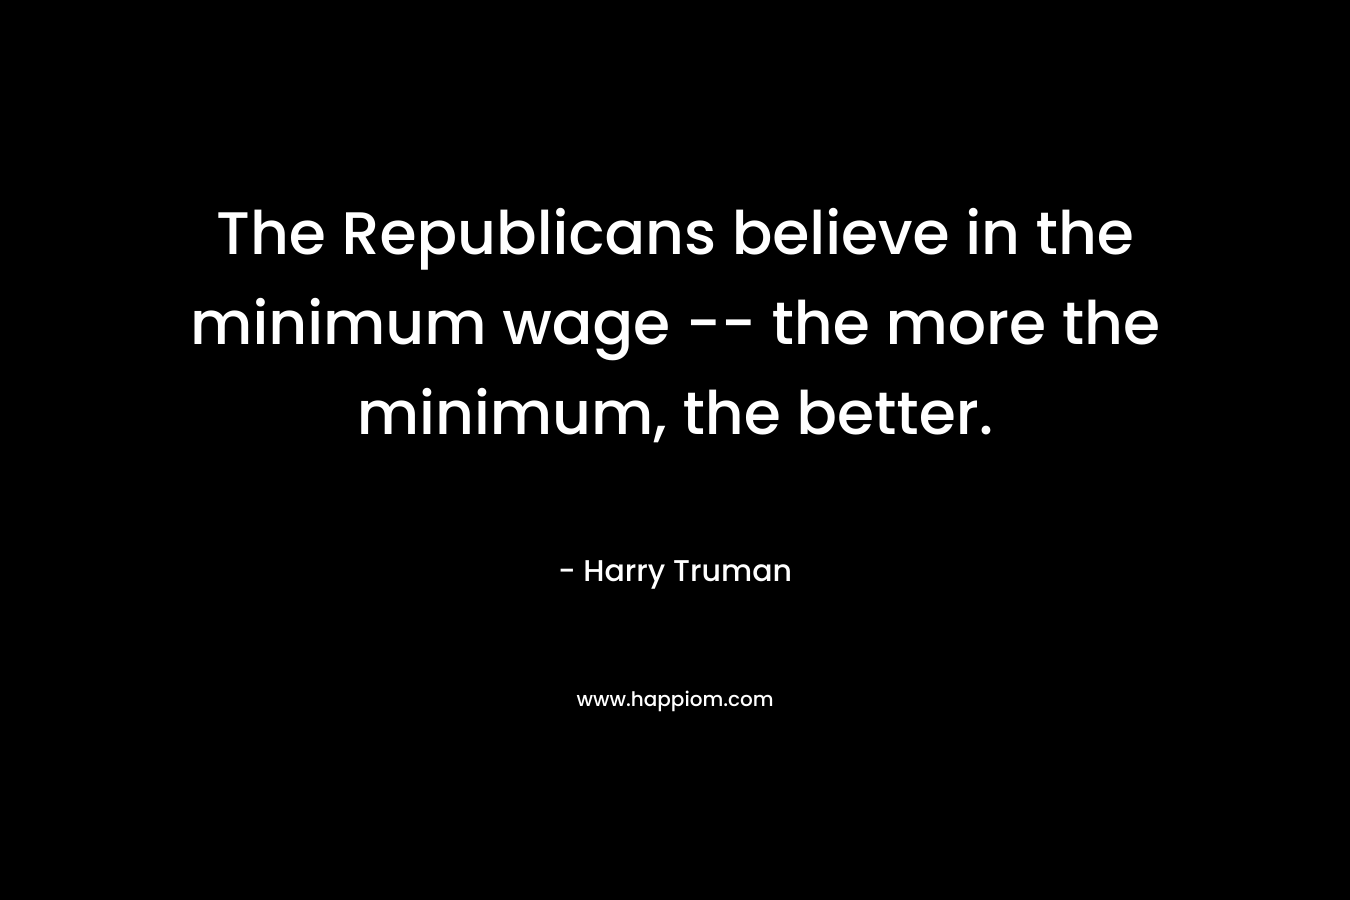 The Republicans believe in the minimum wage — the more the minimum, the better. – Harry Truman